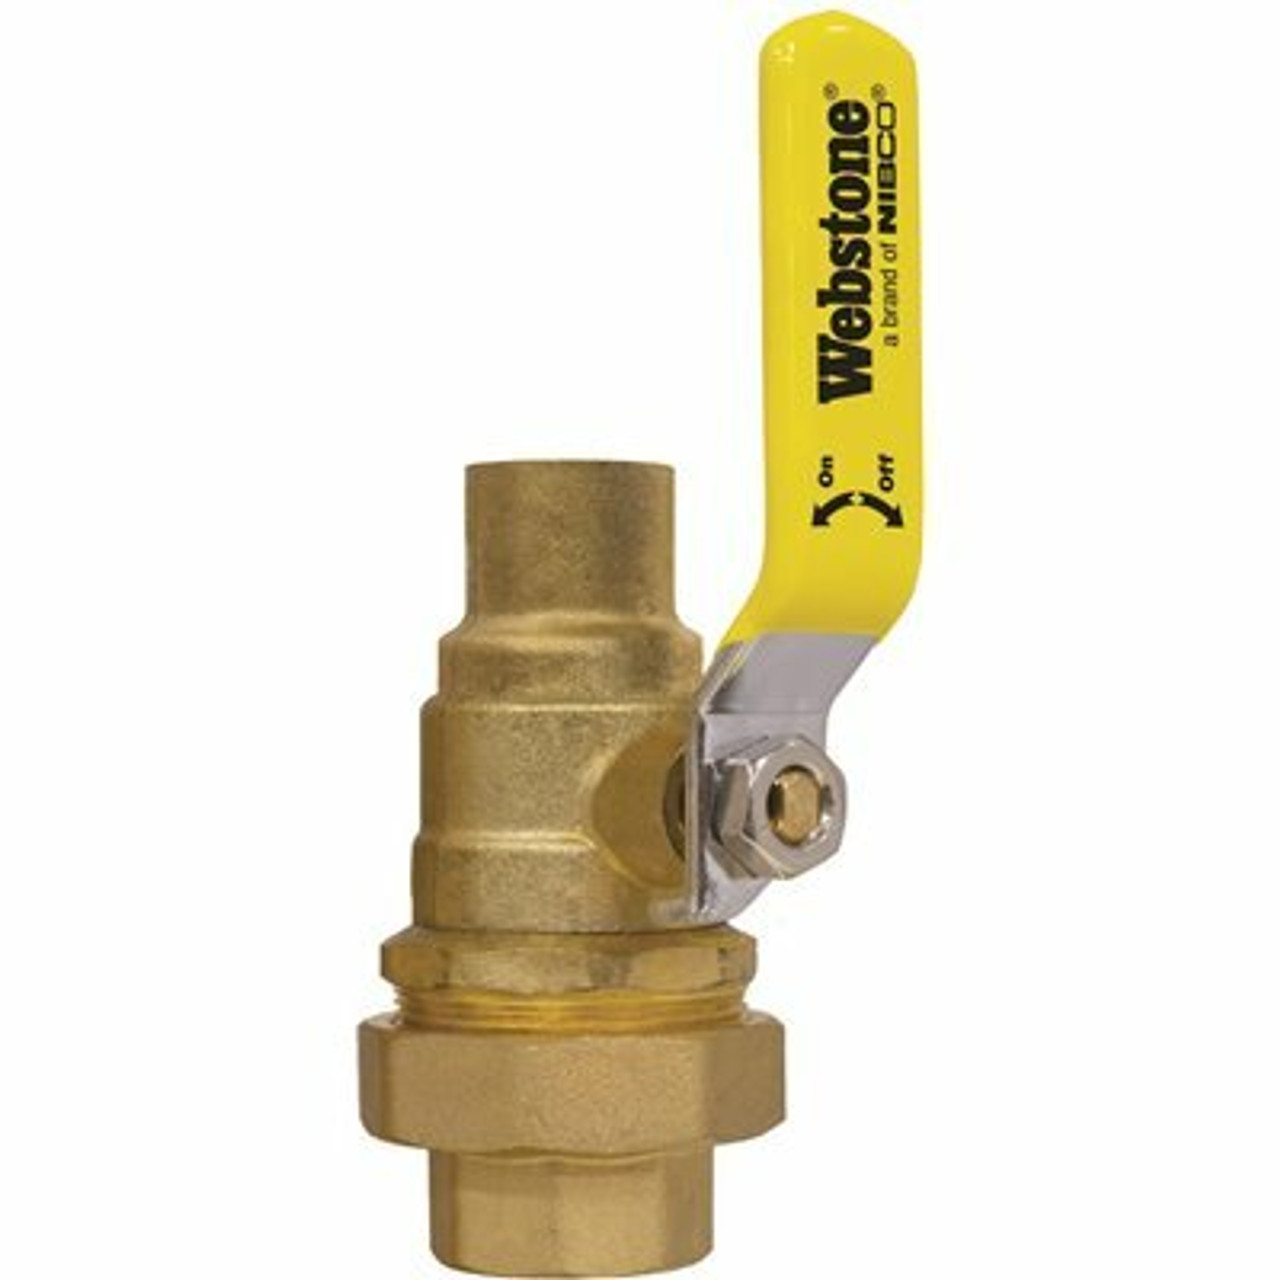 Nibco 3/4 In. Fip Union X Fip Forged Lead Free Brass Single Union End Ball Valve W/Adjustable Packing Gland - 313350048